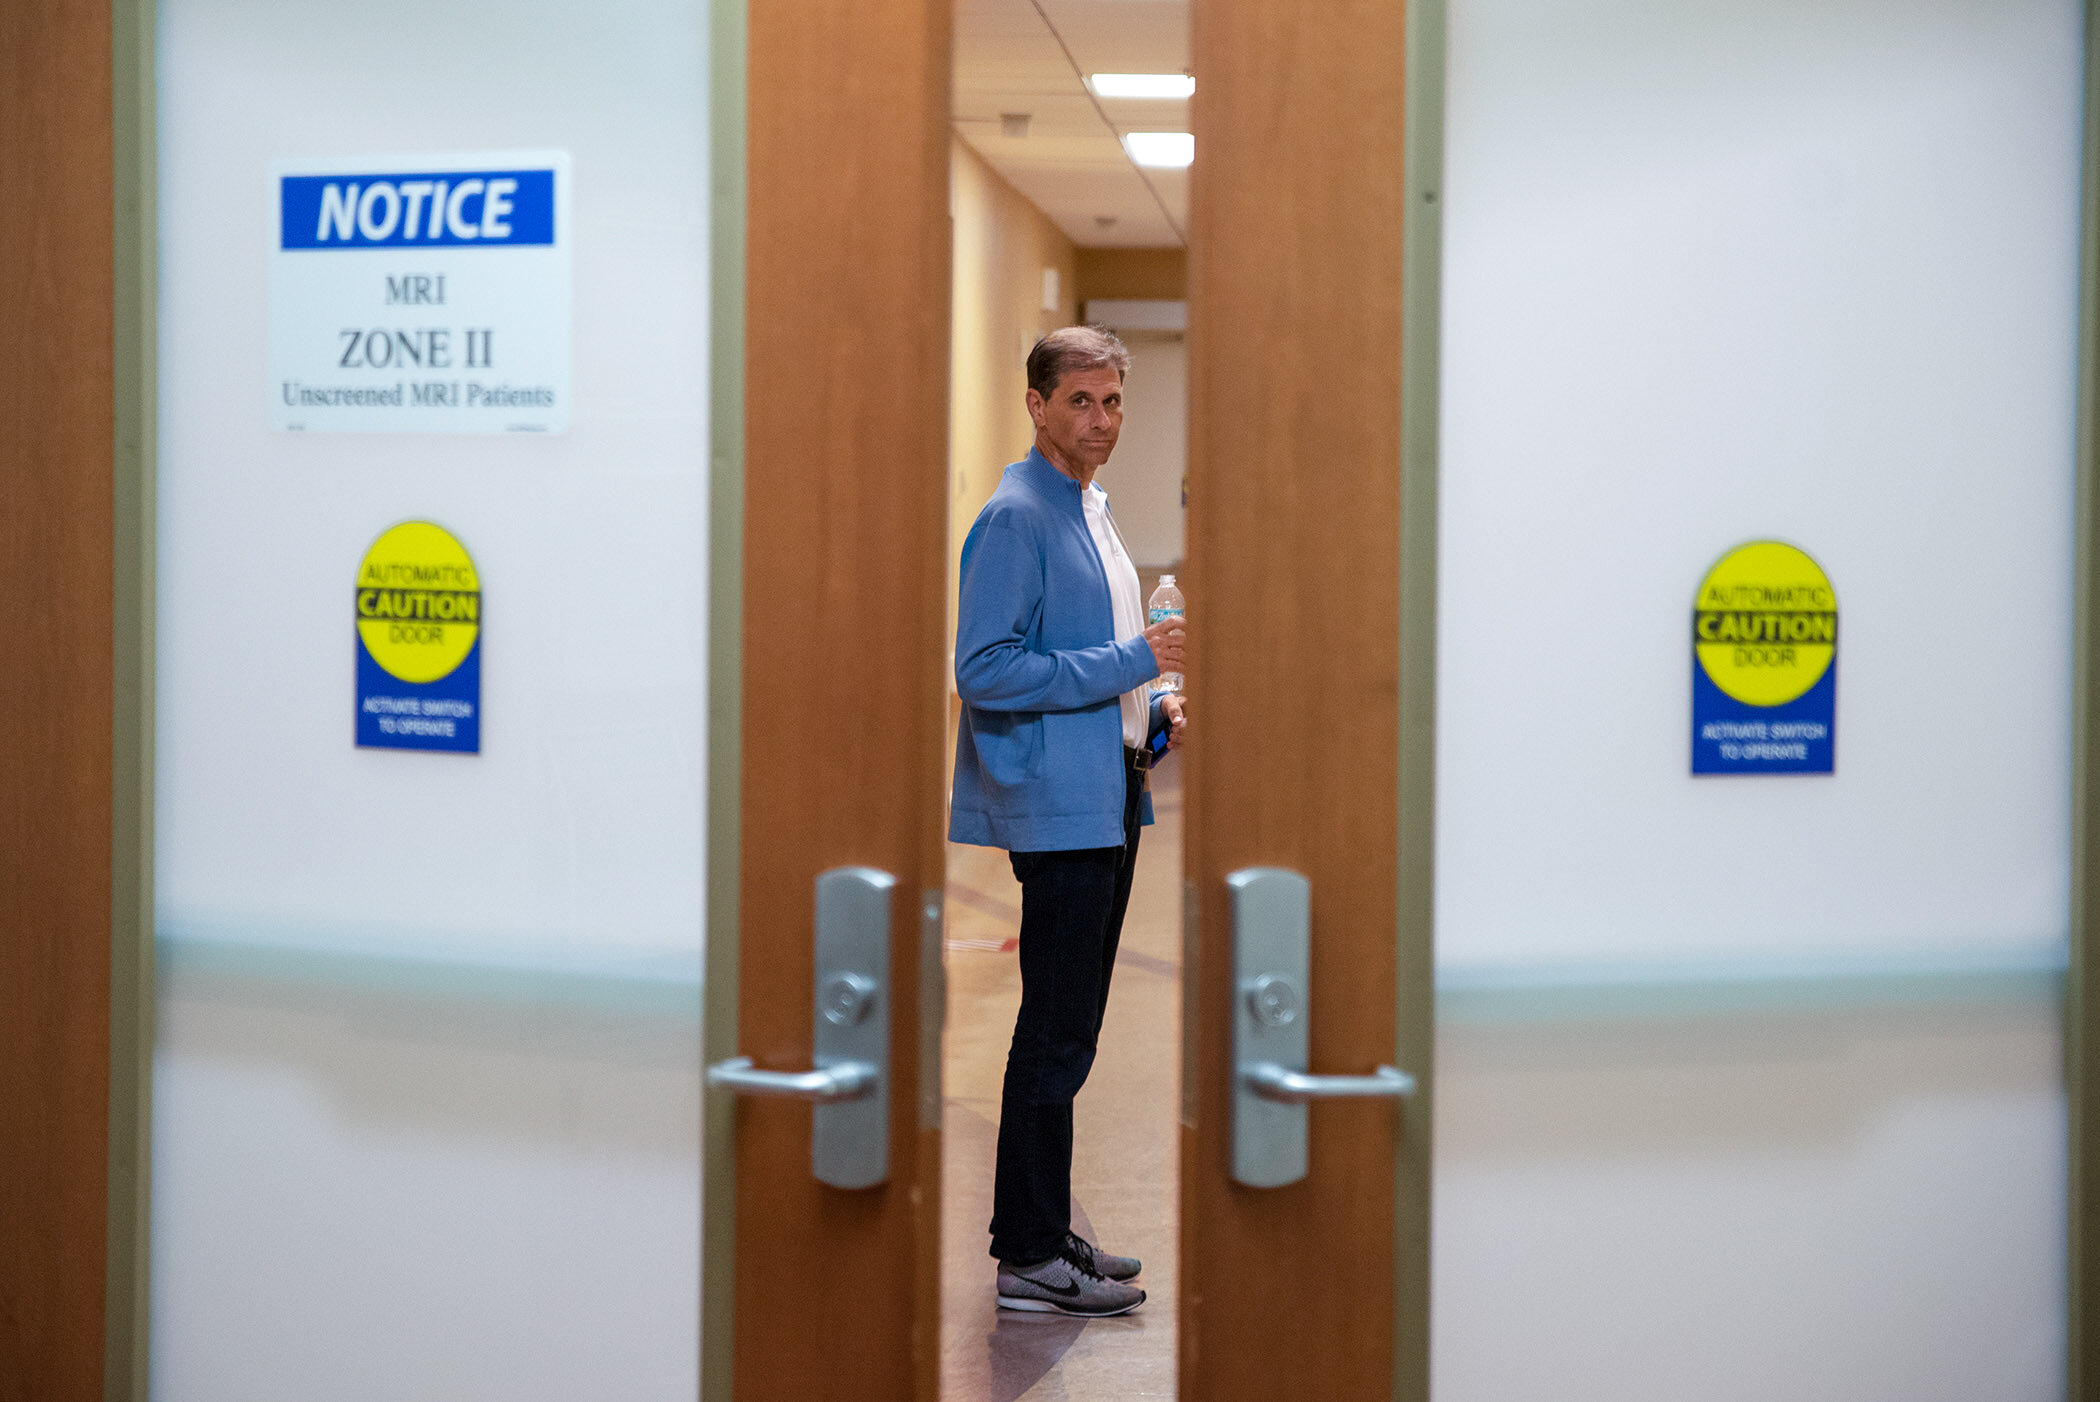  Moments before getting a CT scan, Tendler glances back through the doorway to his aunt, who is accompanying him throughout the visit. Later, a meeting with his physician confirms the results of the CT scan are not good. 